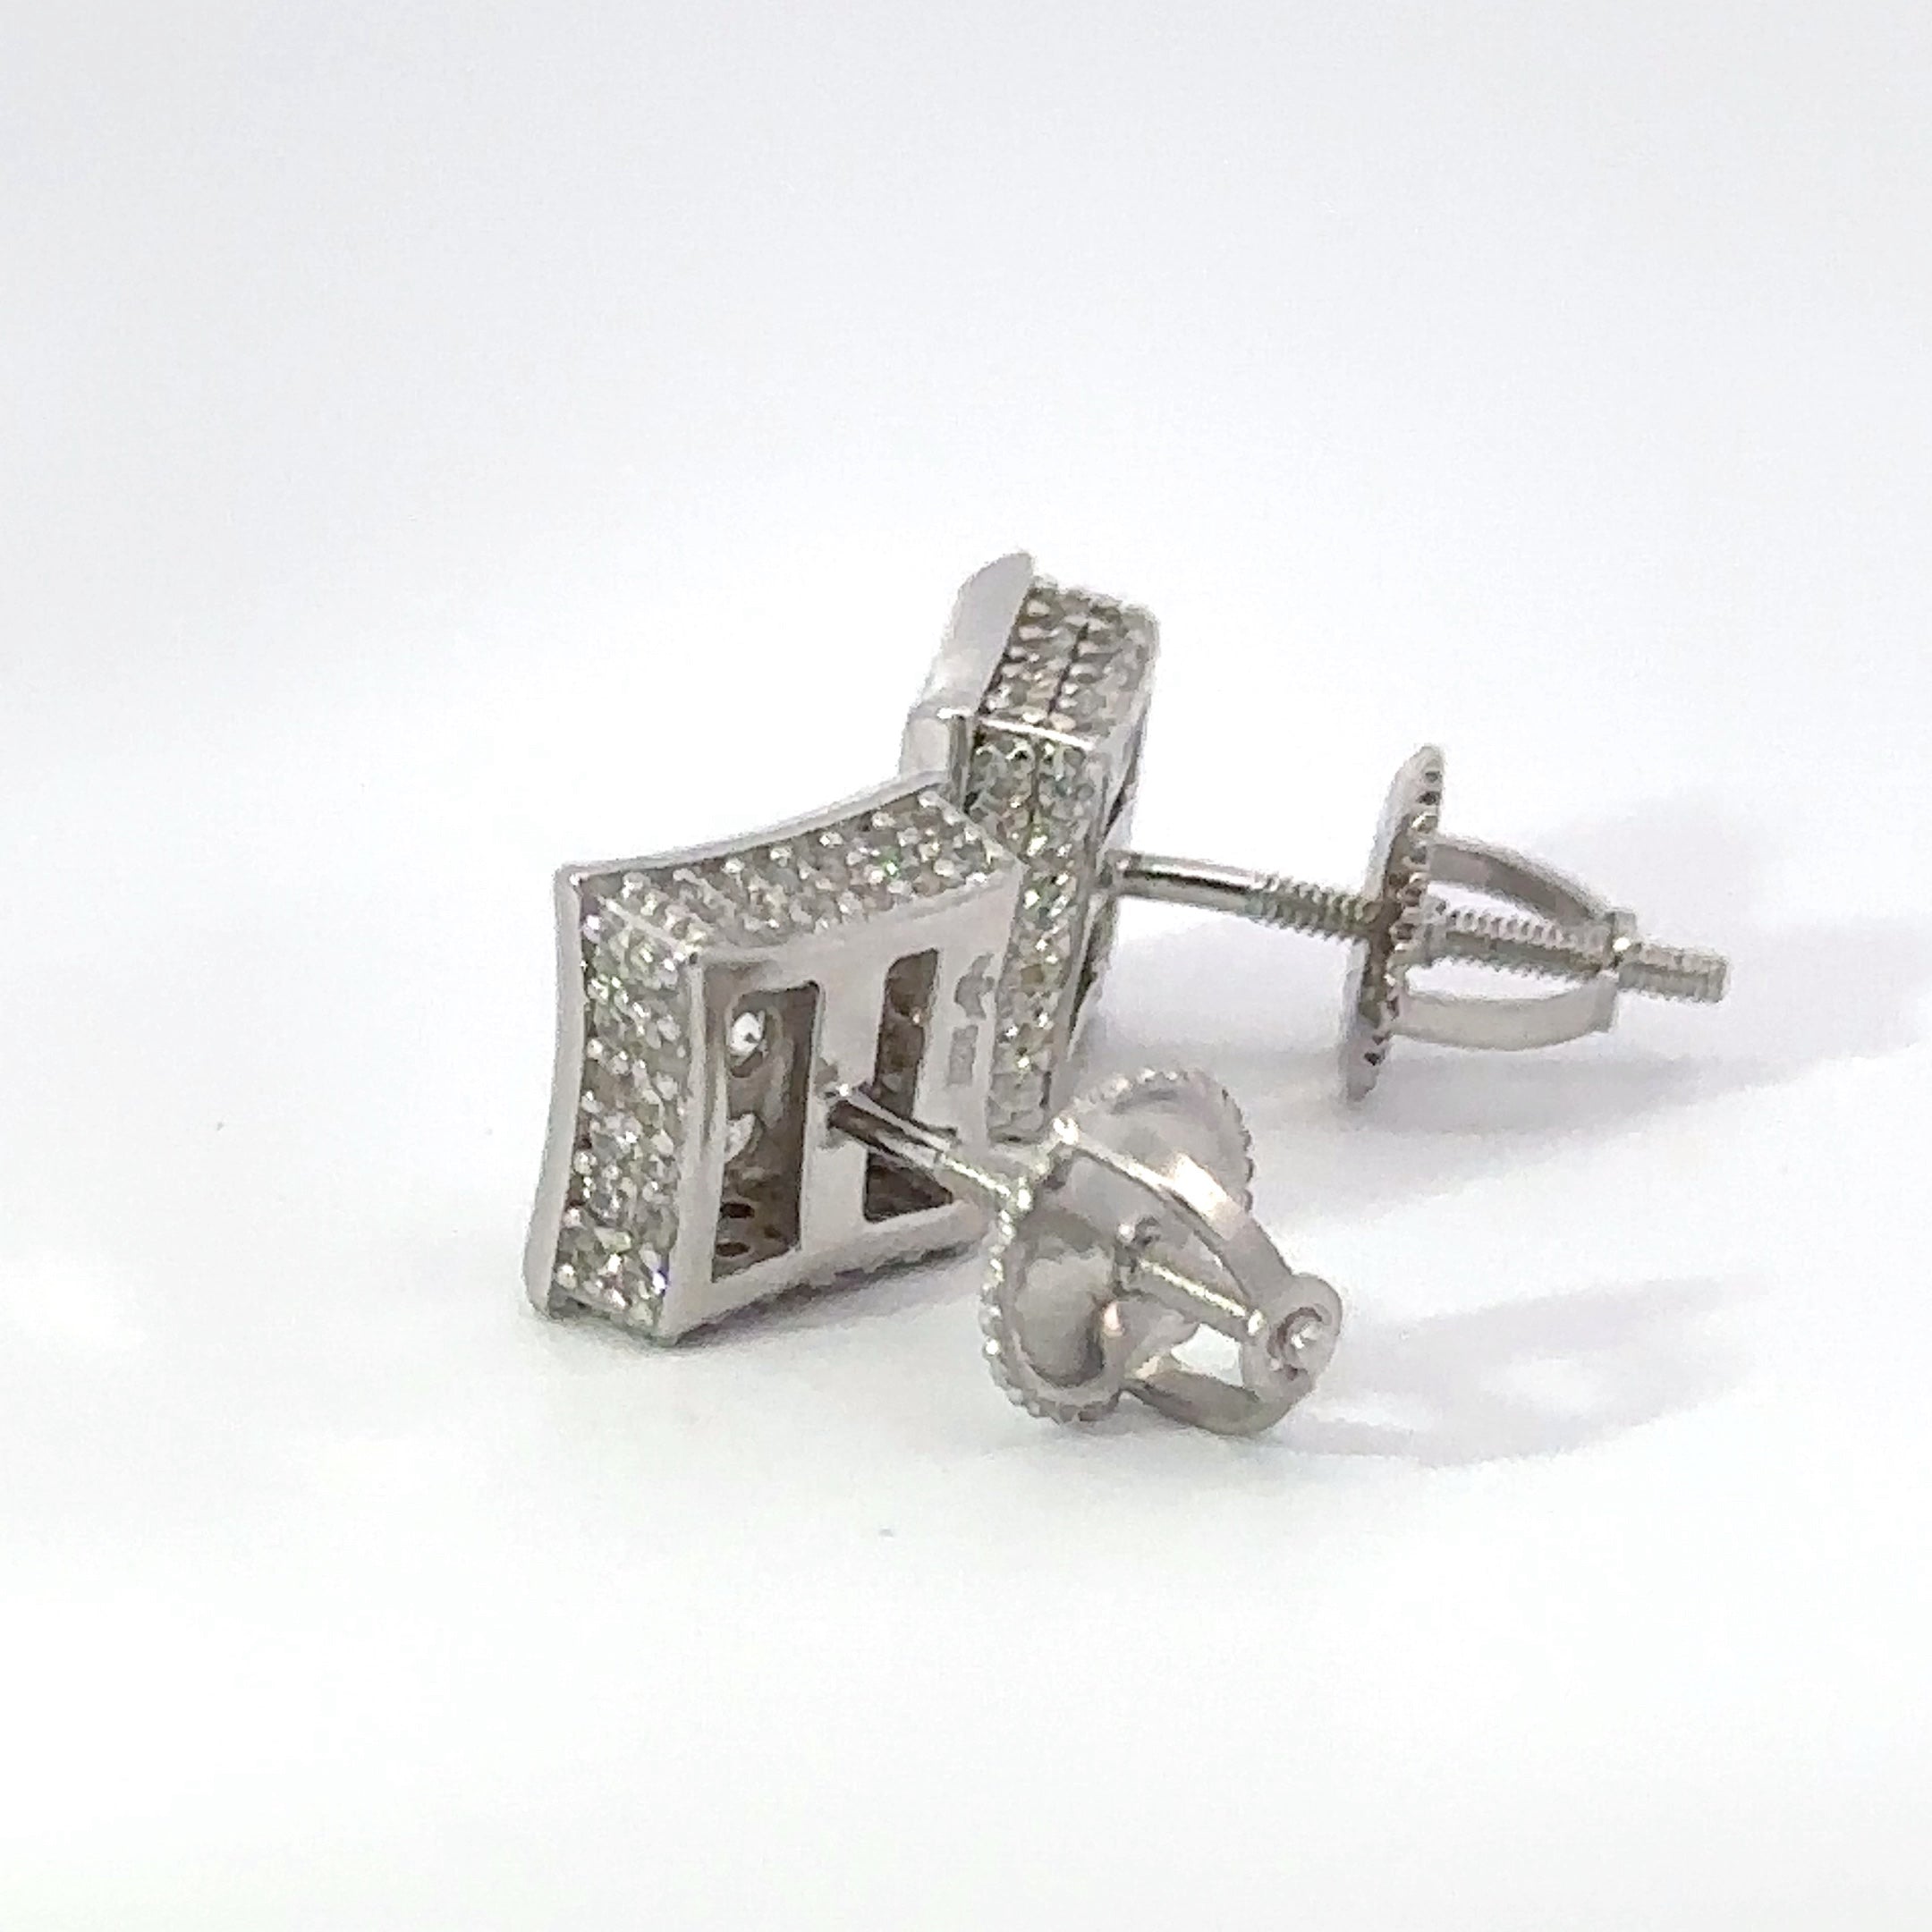 NIVALIS 925 CZ RHODIUM ICED OUT EARRINGS | 9219541